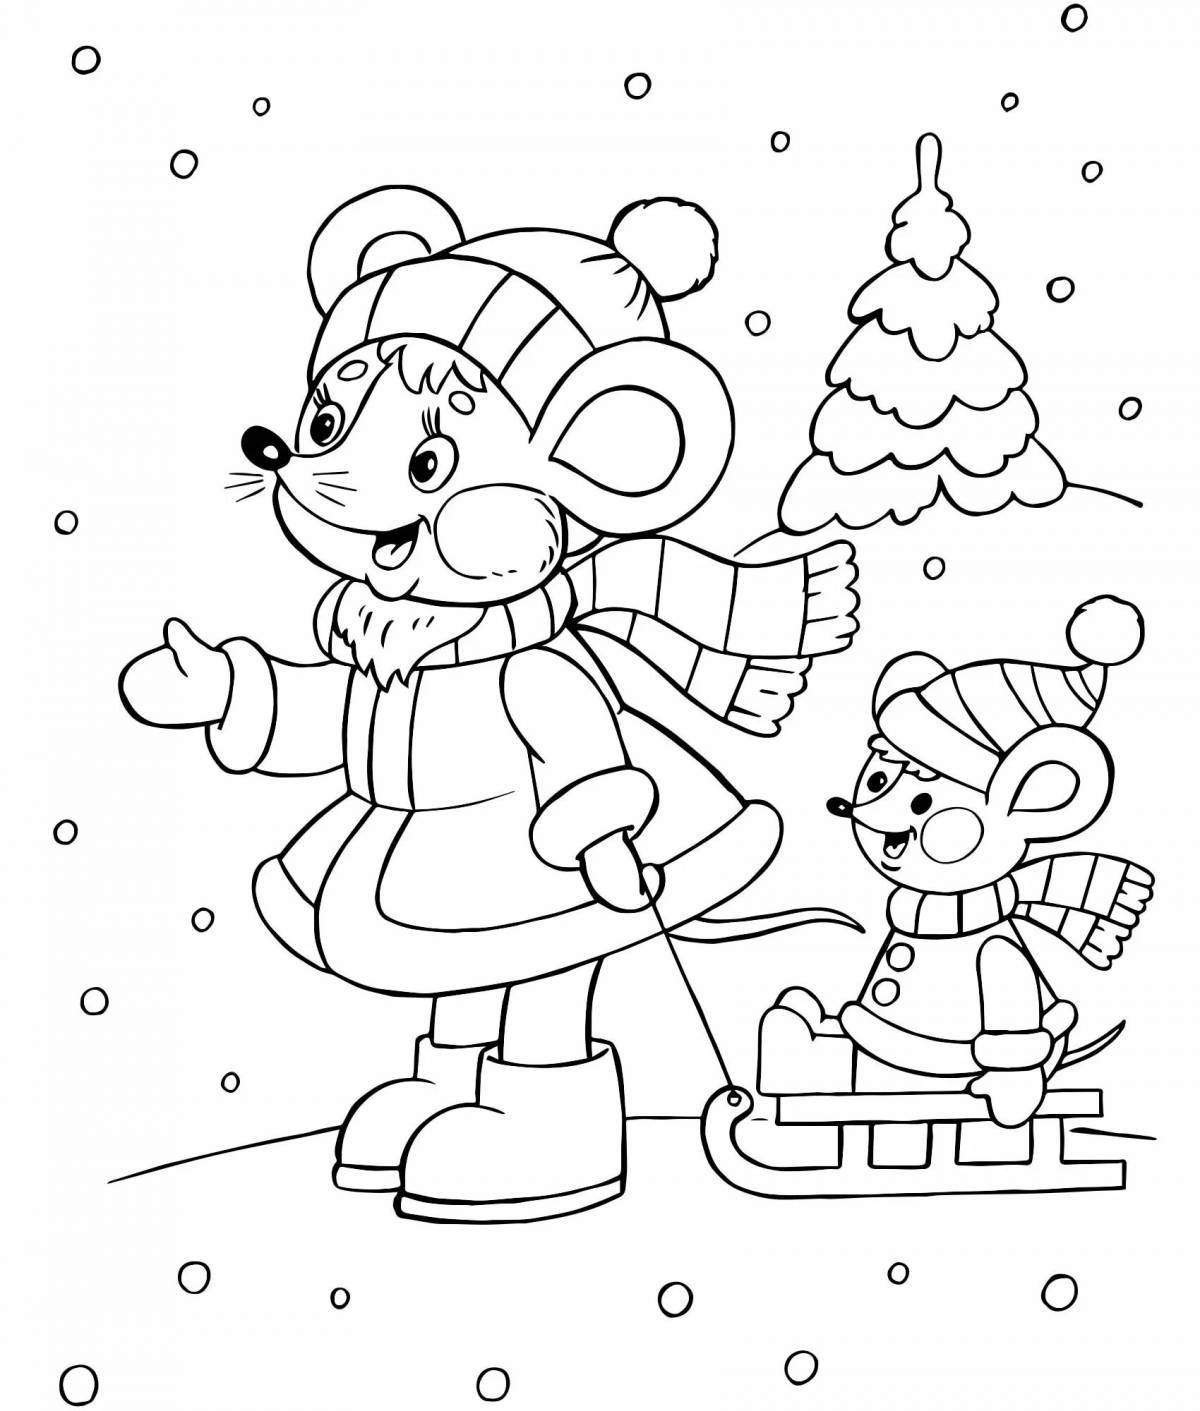 Merry winter coloring for children 3-4 years old